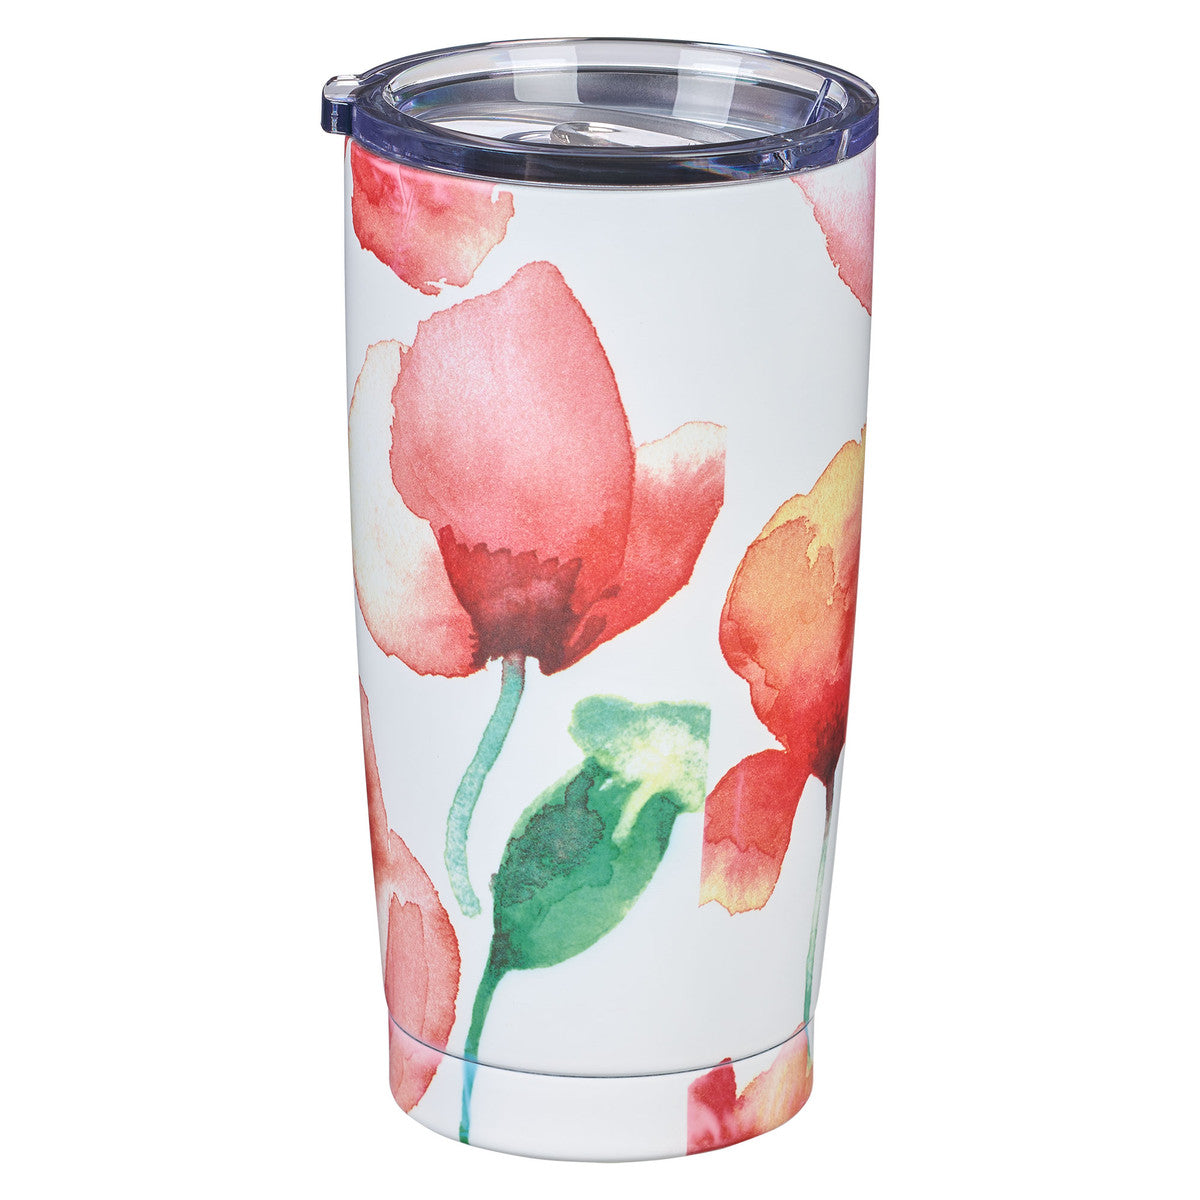 Hope Anchors the Soul Coral Poppies Stainless Steel Travel Mug - The Christian Gift Company